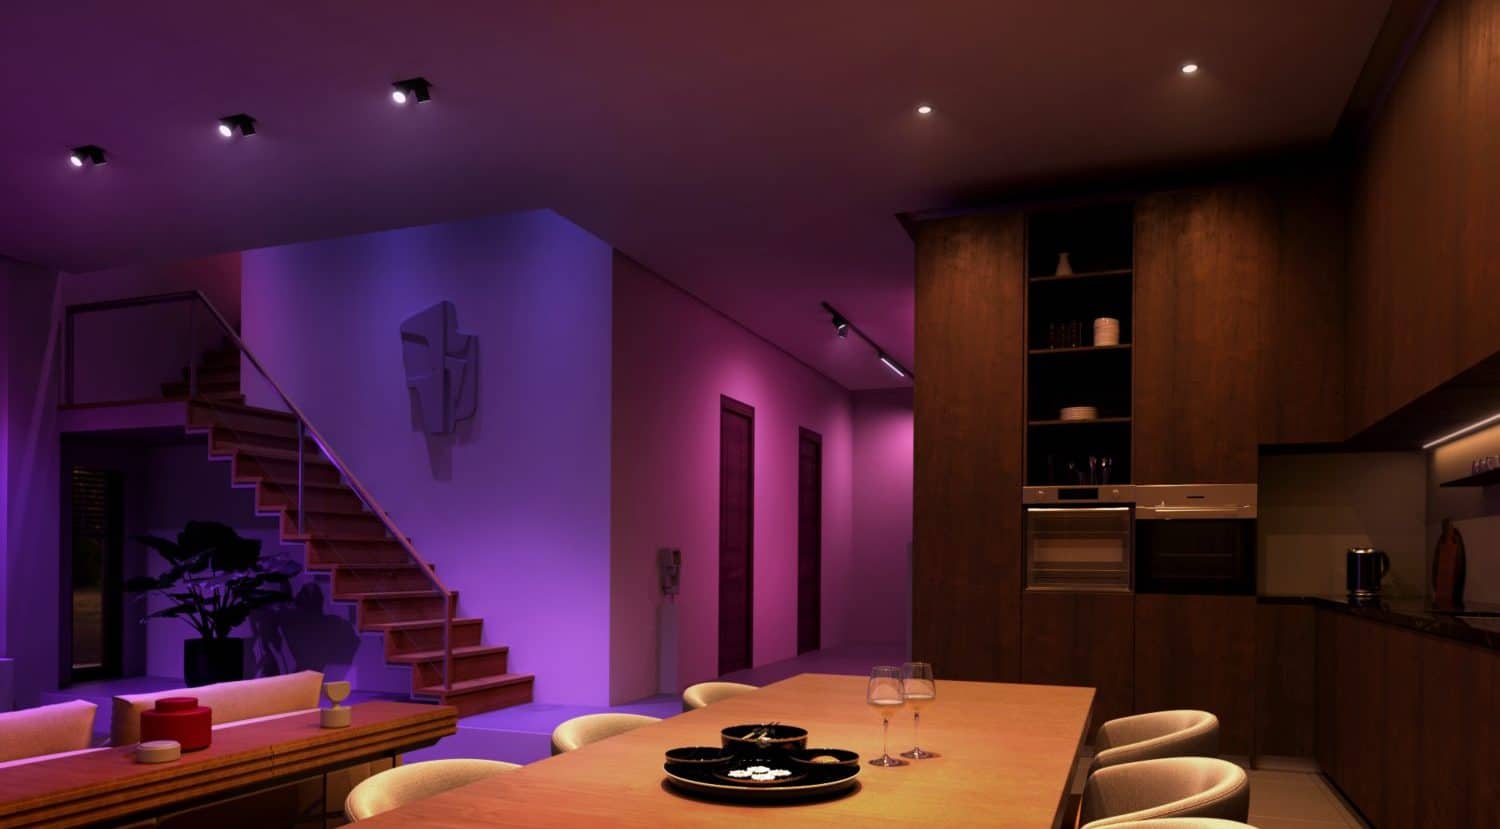 Hueblog: The stage is set for brighter GU10 spotlights from Philips Hue